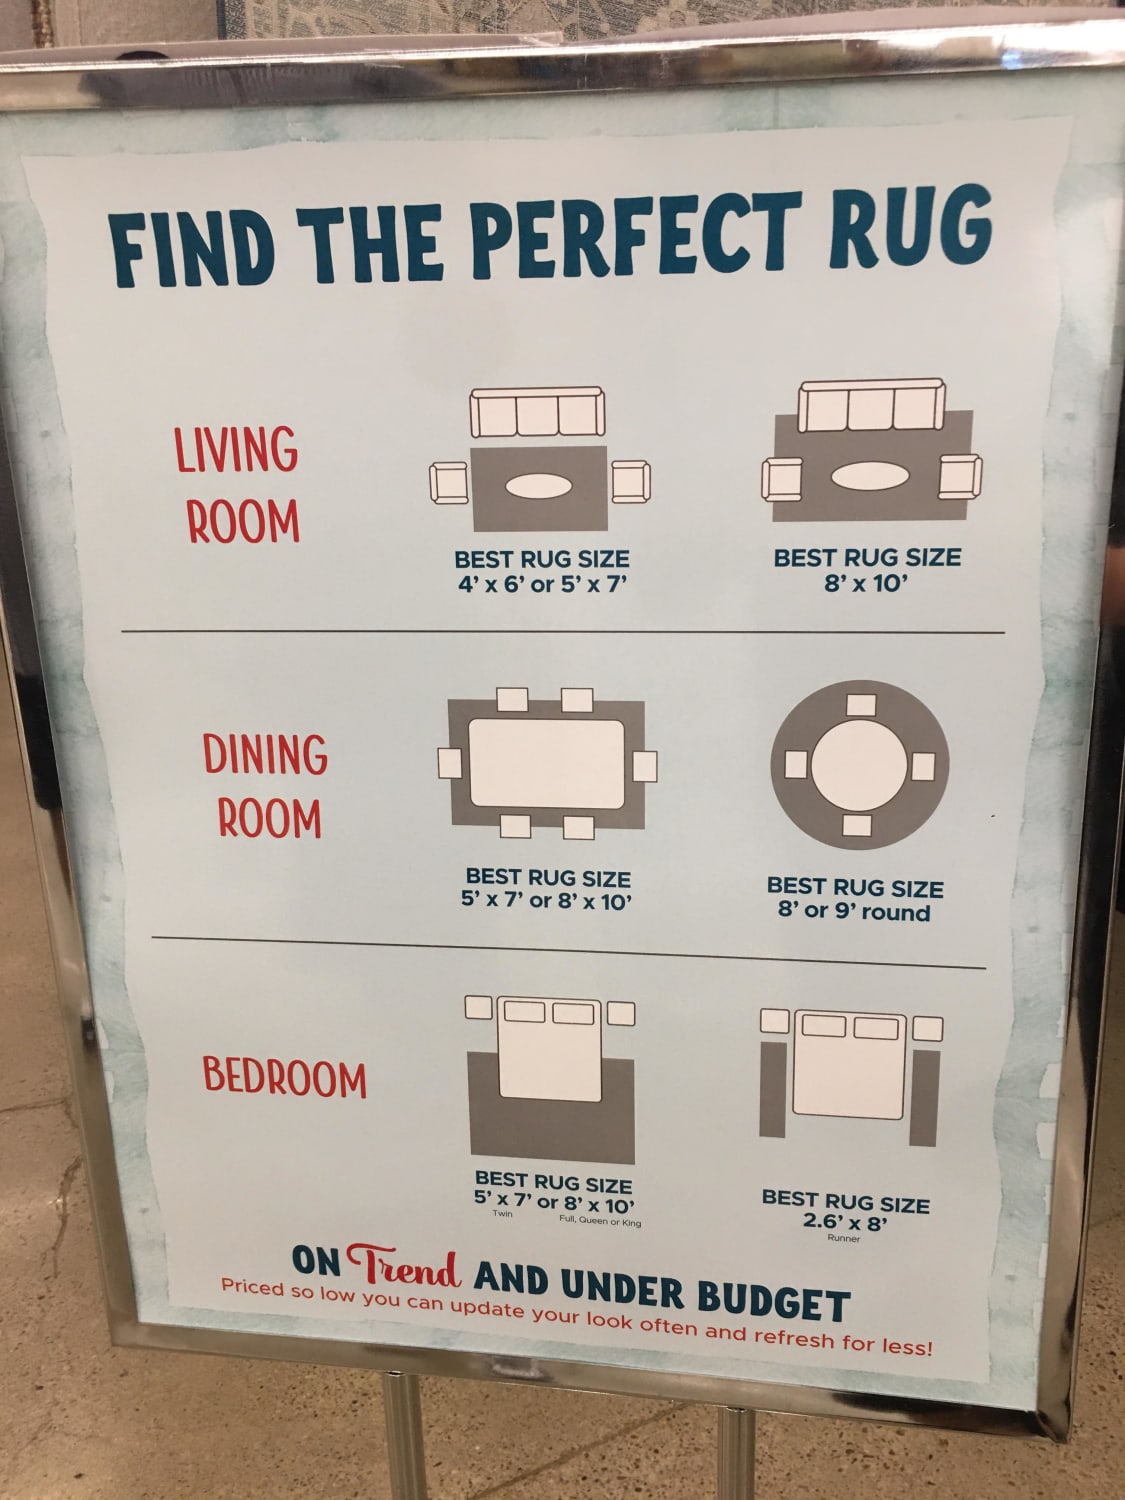 Here’s a guide on how to find the perfect rug. I found at a now closing Tuesday Morning and figured it belonged on this sub.